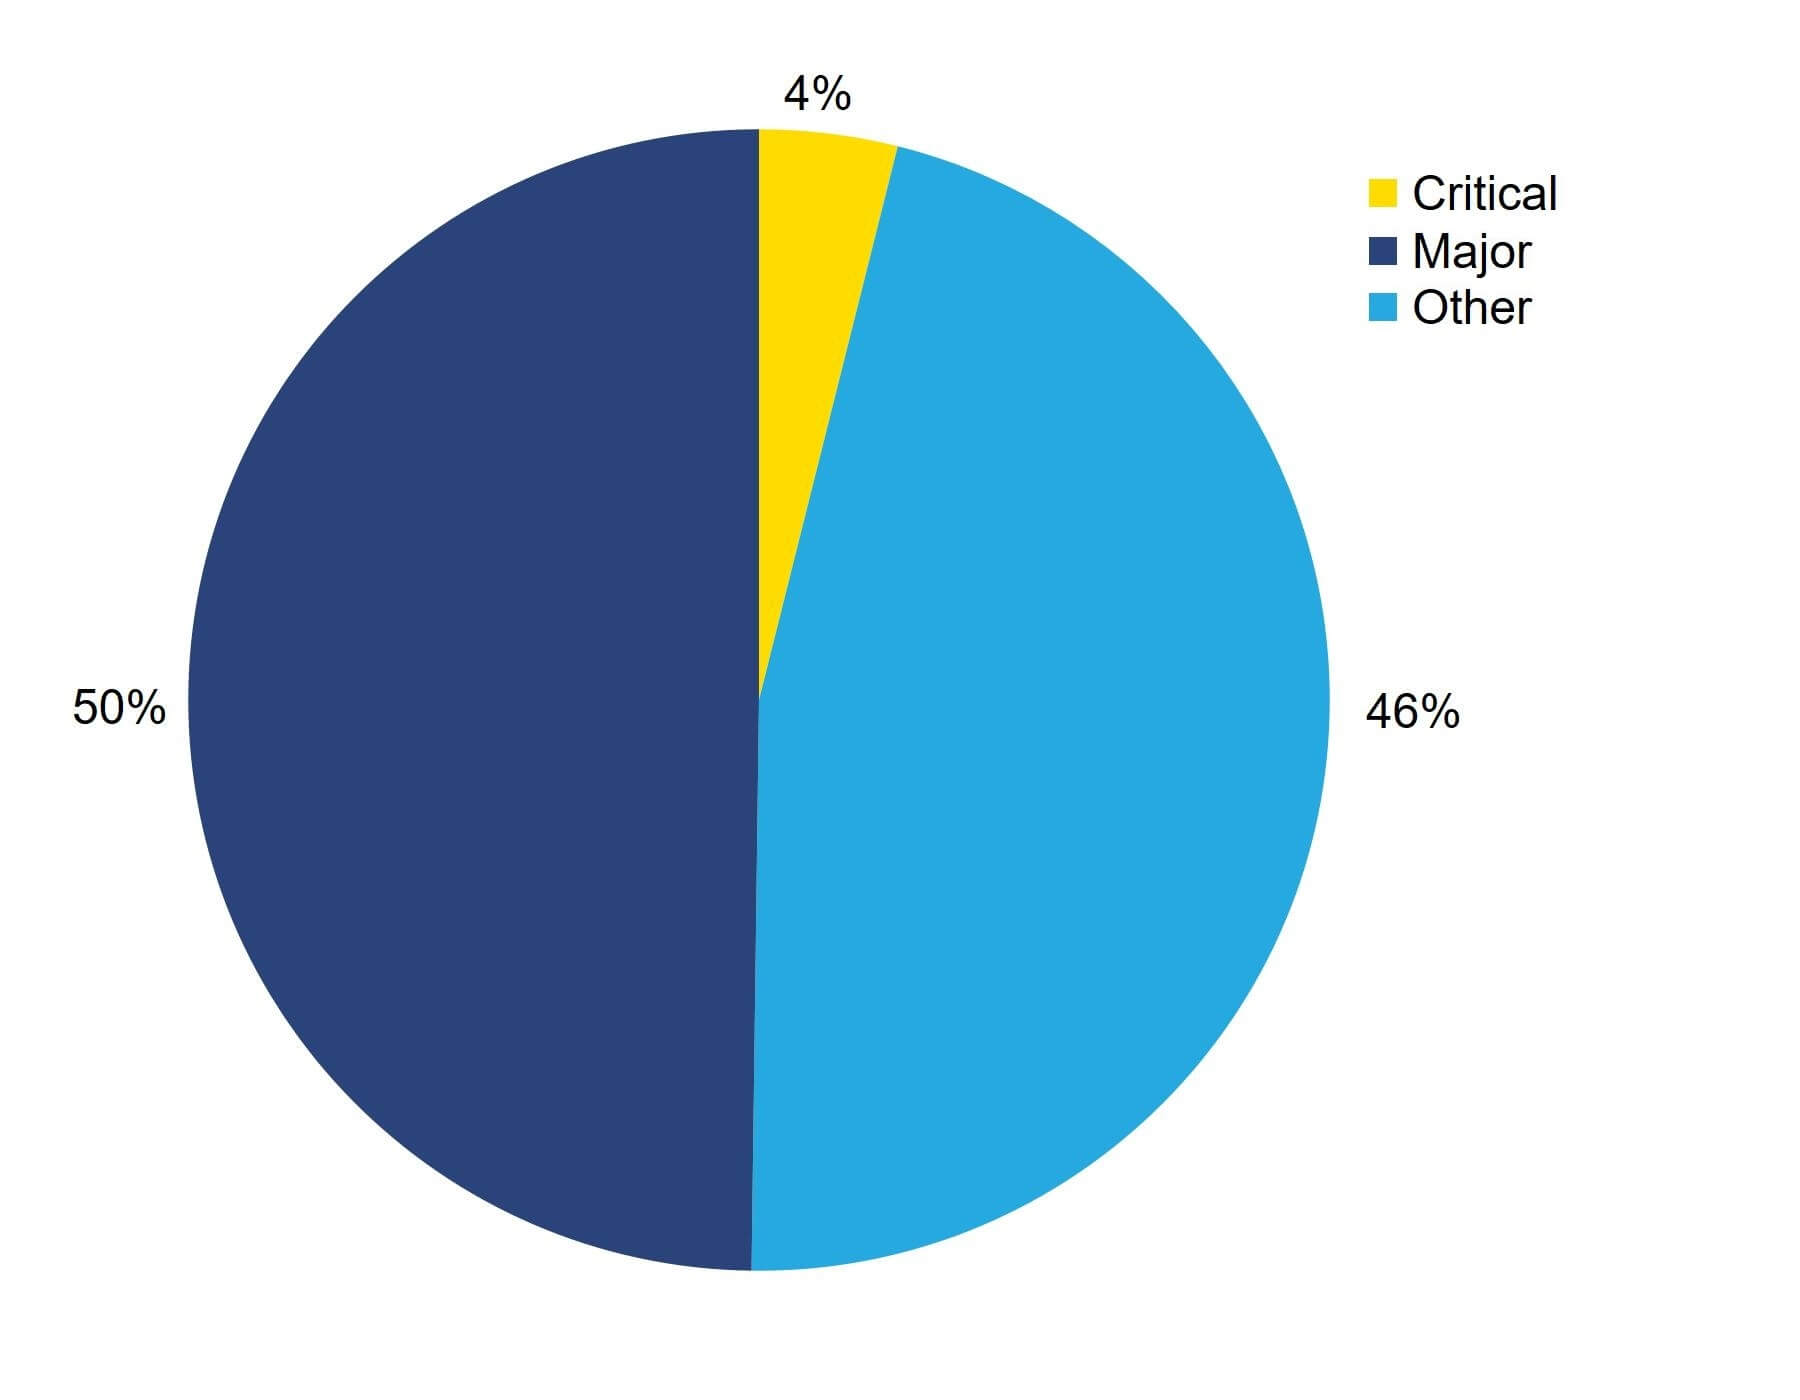 Figure 3: Percentage of non-compliances by grade, 2021/22. Percentage of non-compliances by grade, 2021/22. This pie chart shows the percentages of non-compliances identified in 2021/22 grouped by grade. A small number (4%) were reported as Critical, 50% were Major, and 46% were Other. An accessible form of the underlying data for this figure can be downloaded at the start of the report in .xls format.